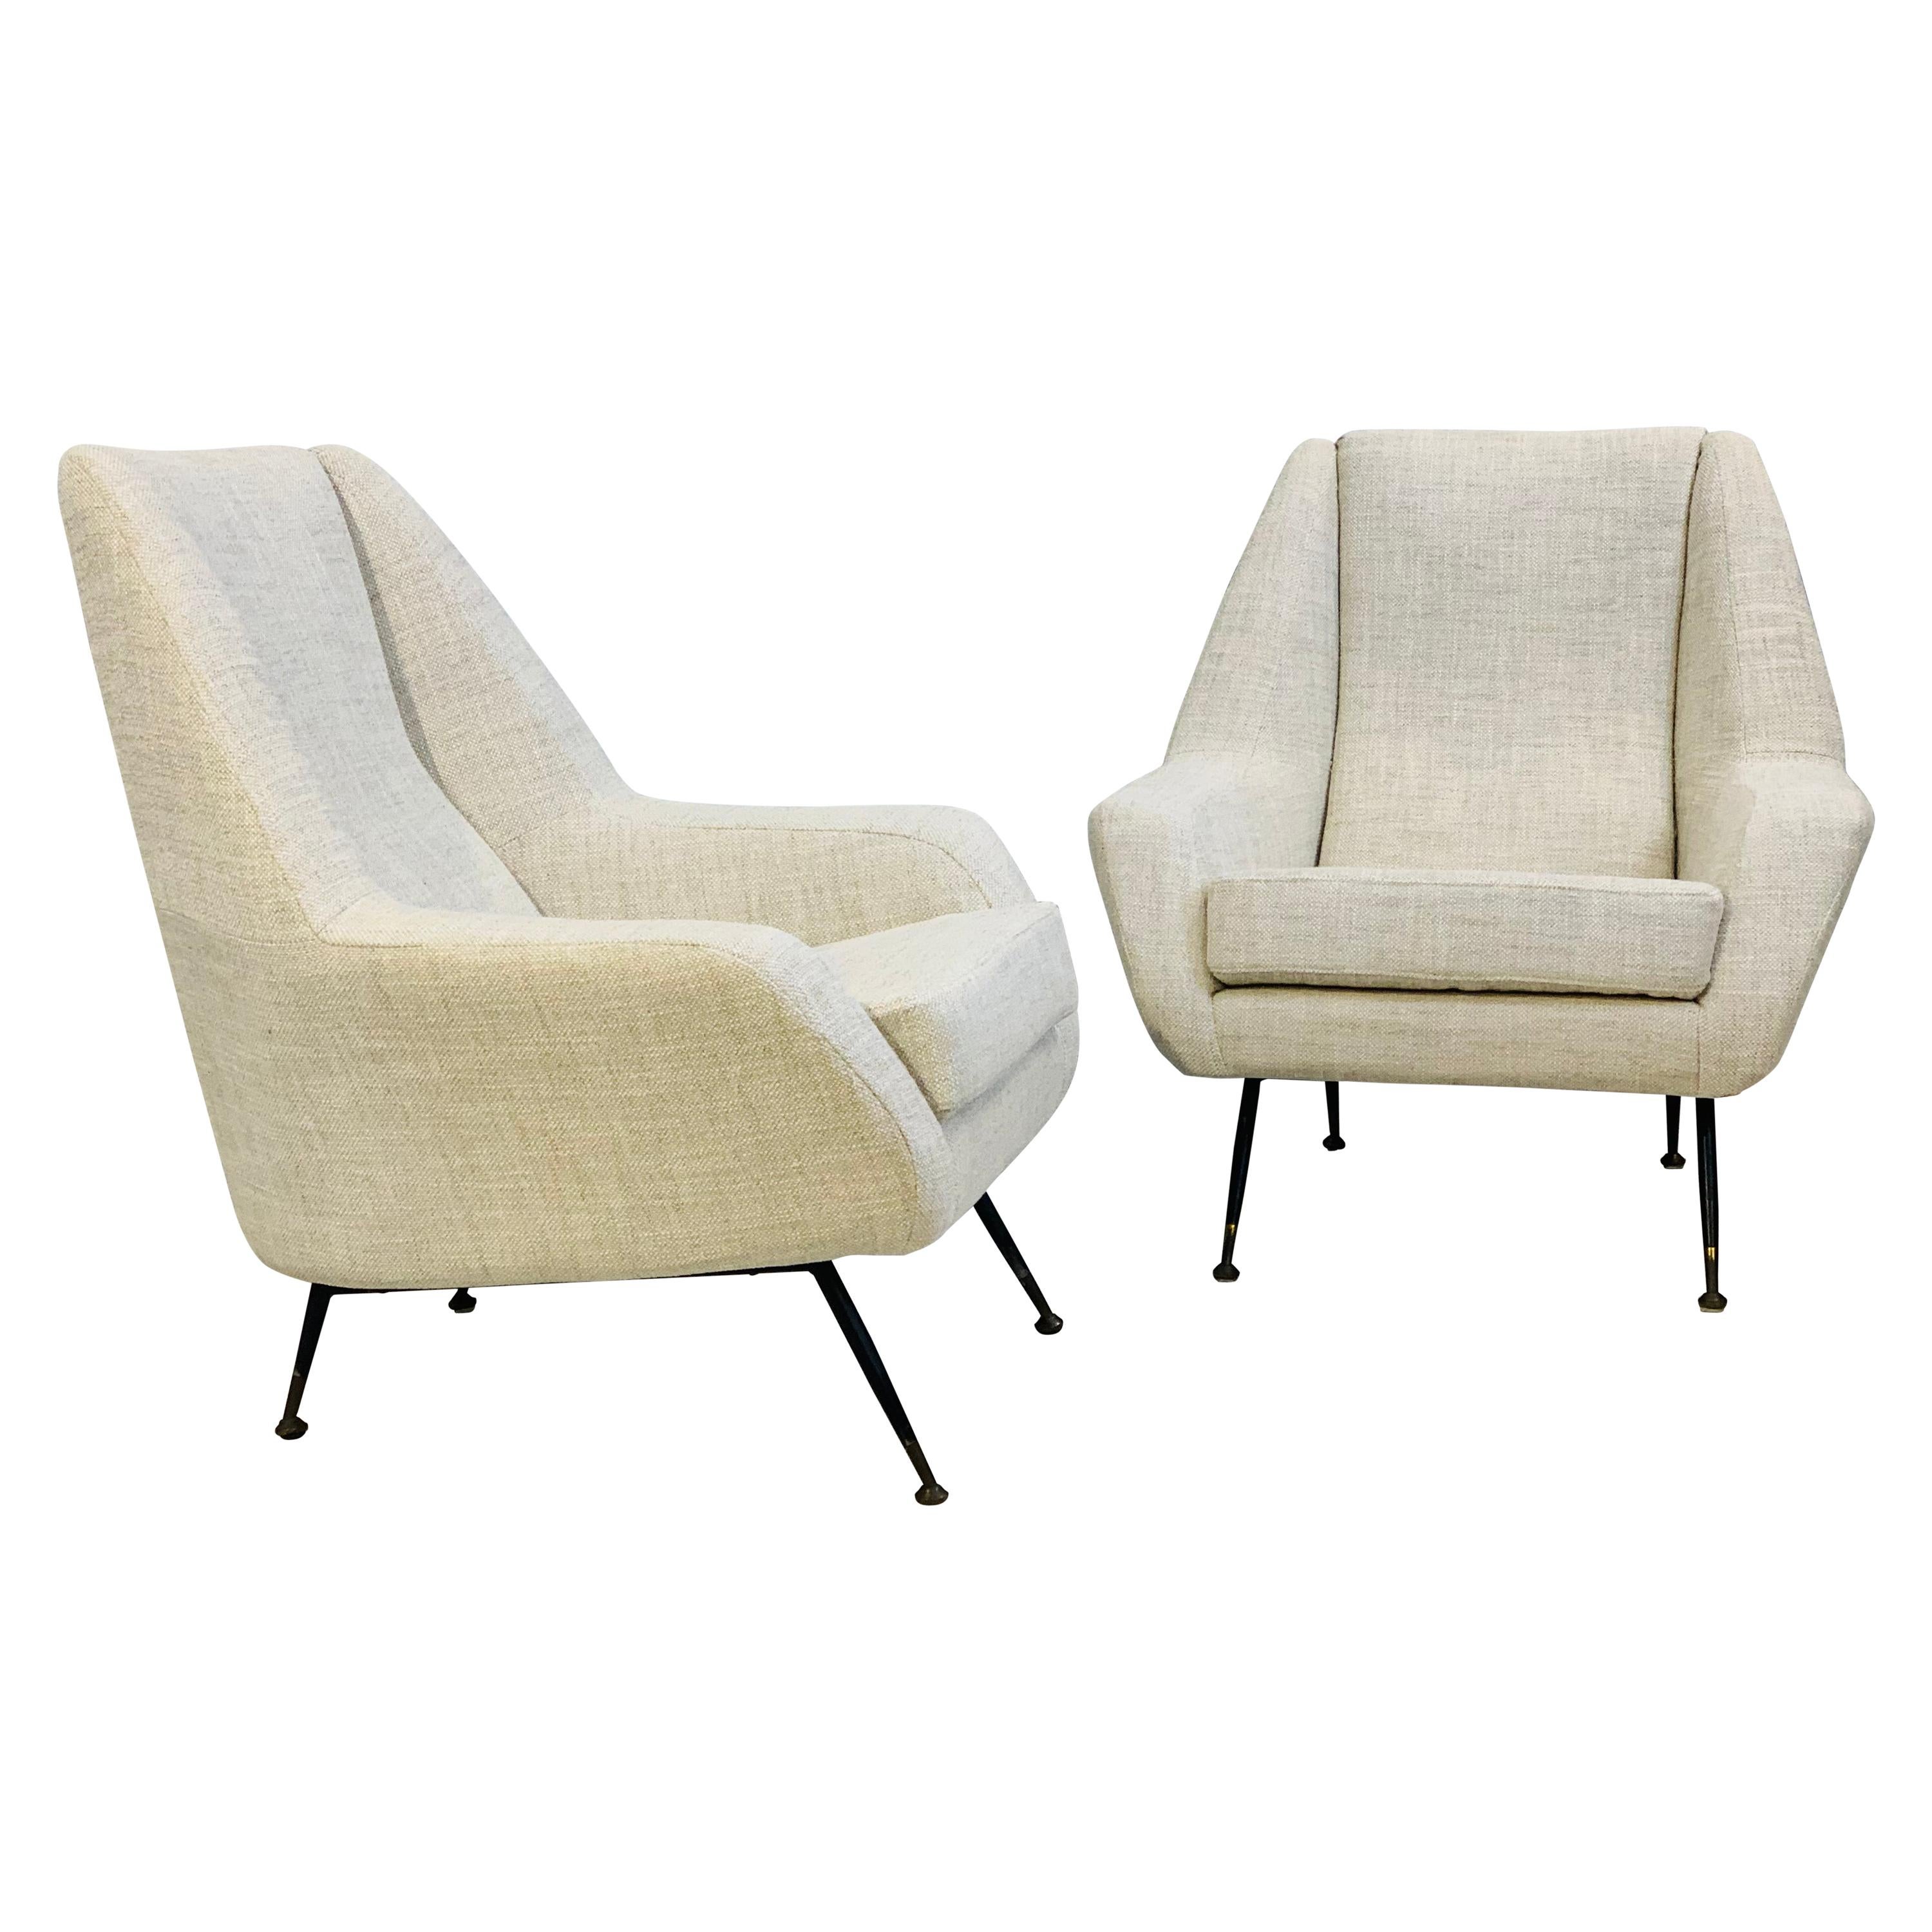 Pair of Mid-Century Modern Italian Armchairs in White Fabric, circa 1950 For Sale